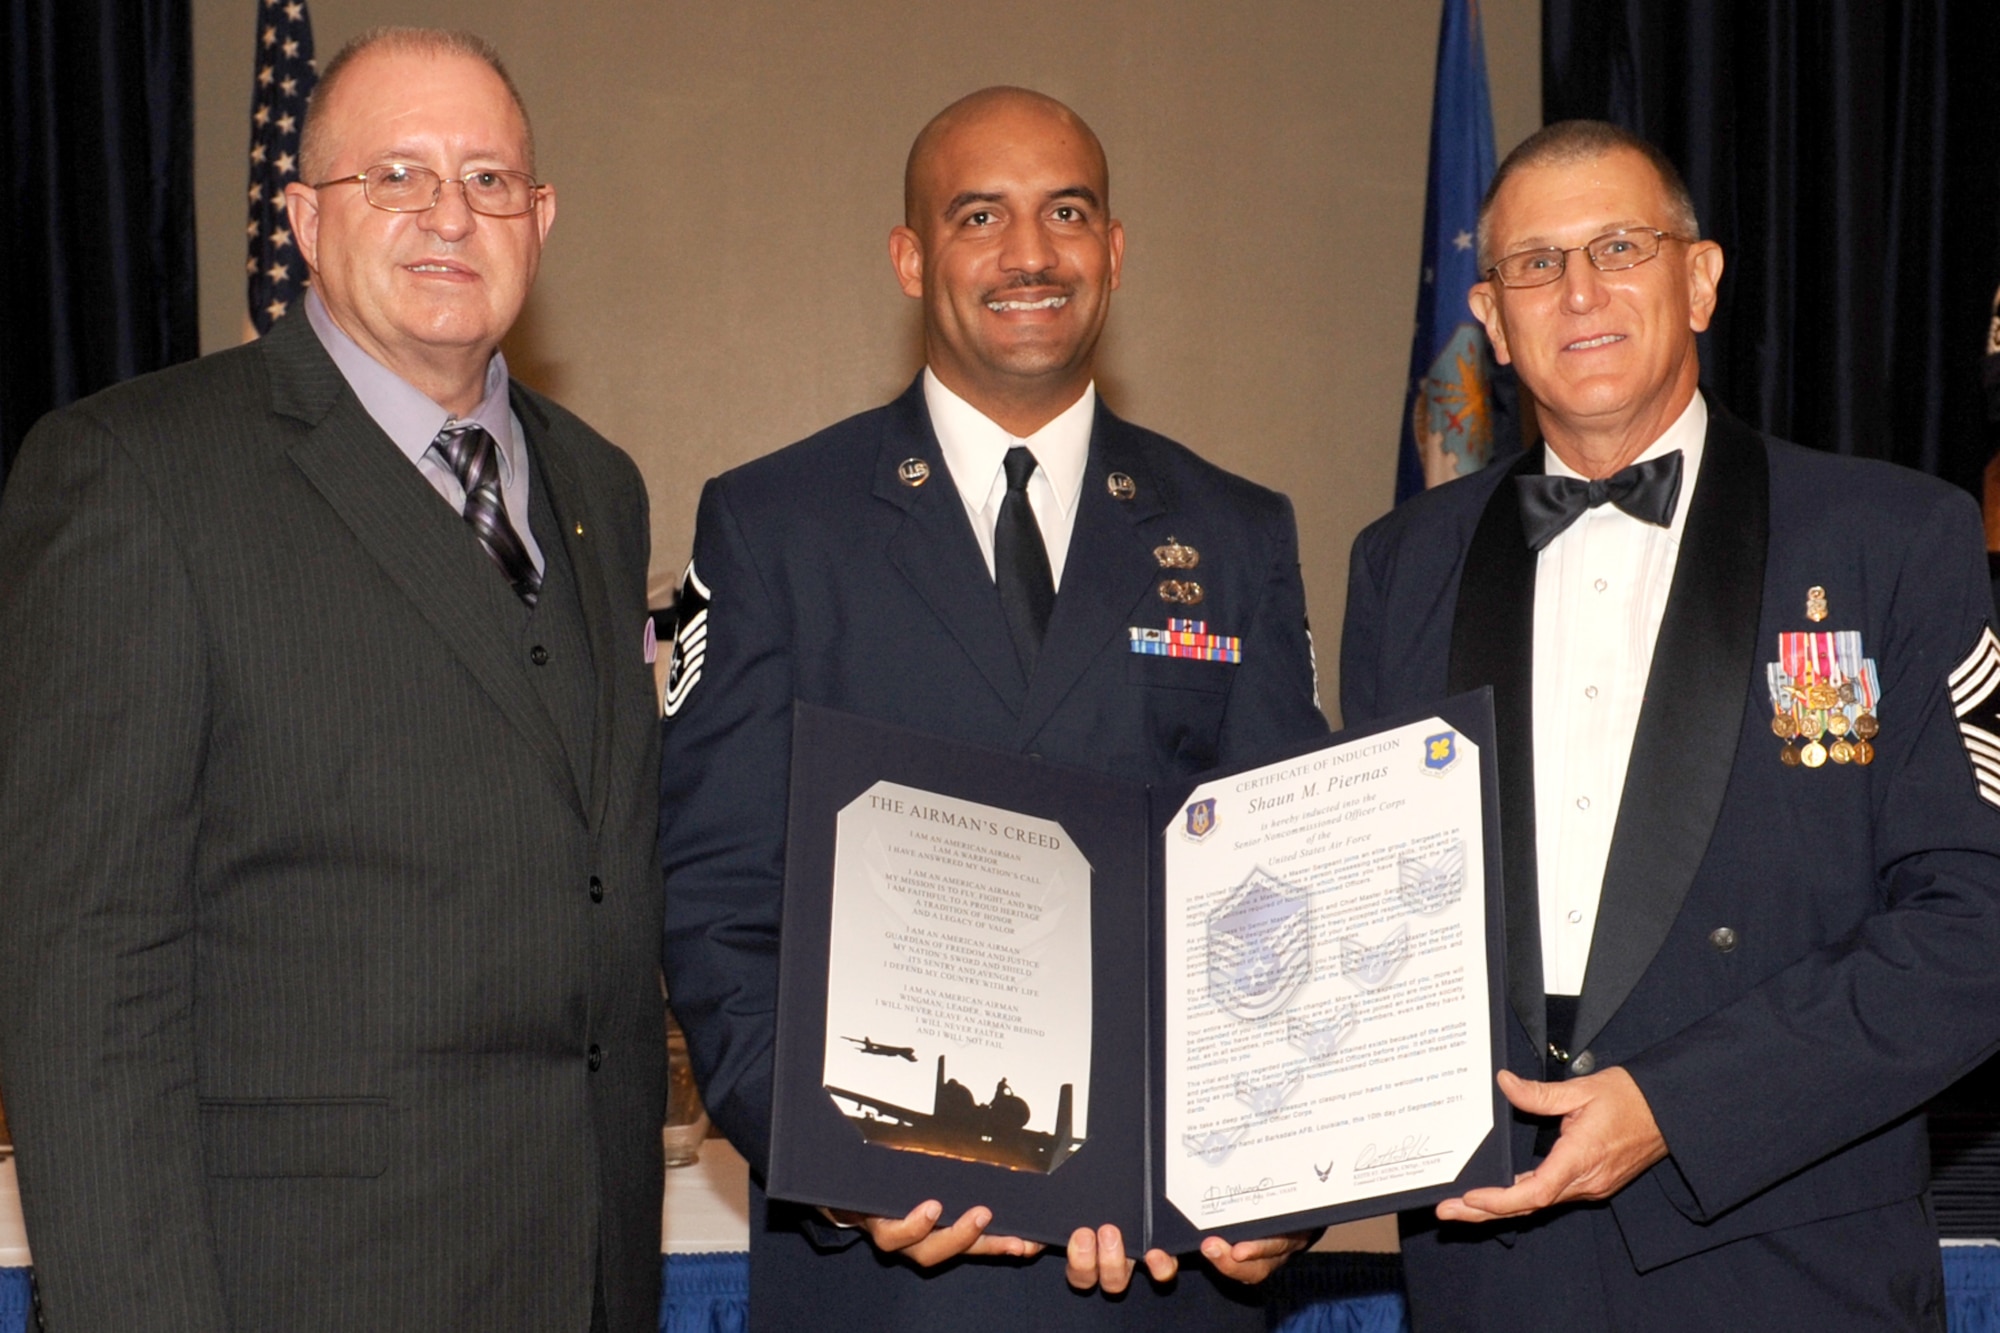 U.S. Air Force Master Sgt. Shaun Piernas is presented the Certificate of Induction by retired Chief Master Sgt. Larry Payne and Chief Master Sgt. Keith St. Aubin, 307th Bomb Wing (BW) command chief, during the Senior Noncommisioned Officer Induction Ceremony at Barksdale Air Force Base, La., Sept. 10, 2011. The ceremony is held annually to recognize newly promoted Master Sgts. within the 307th BW, 917th Fighter Group and the 307th Rapid Engineer Deployable Heavy Operations Repair Squadron Engineers. (U.S. Air Force photo by Master Sgt. Greg Steele/Released)